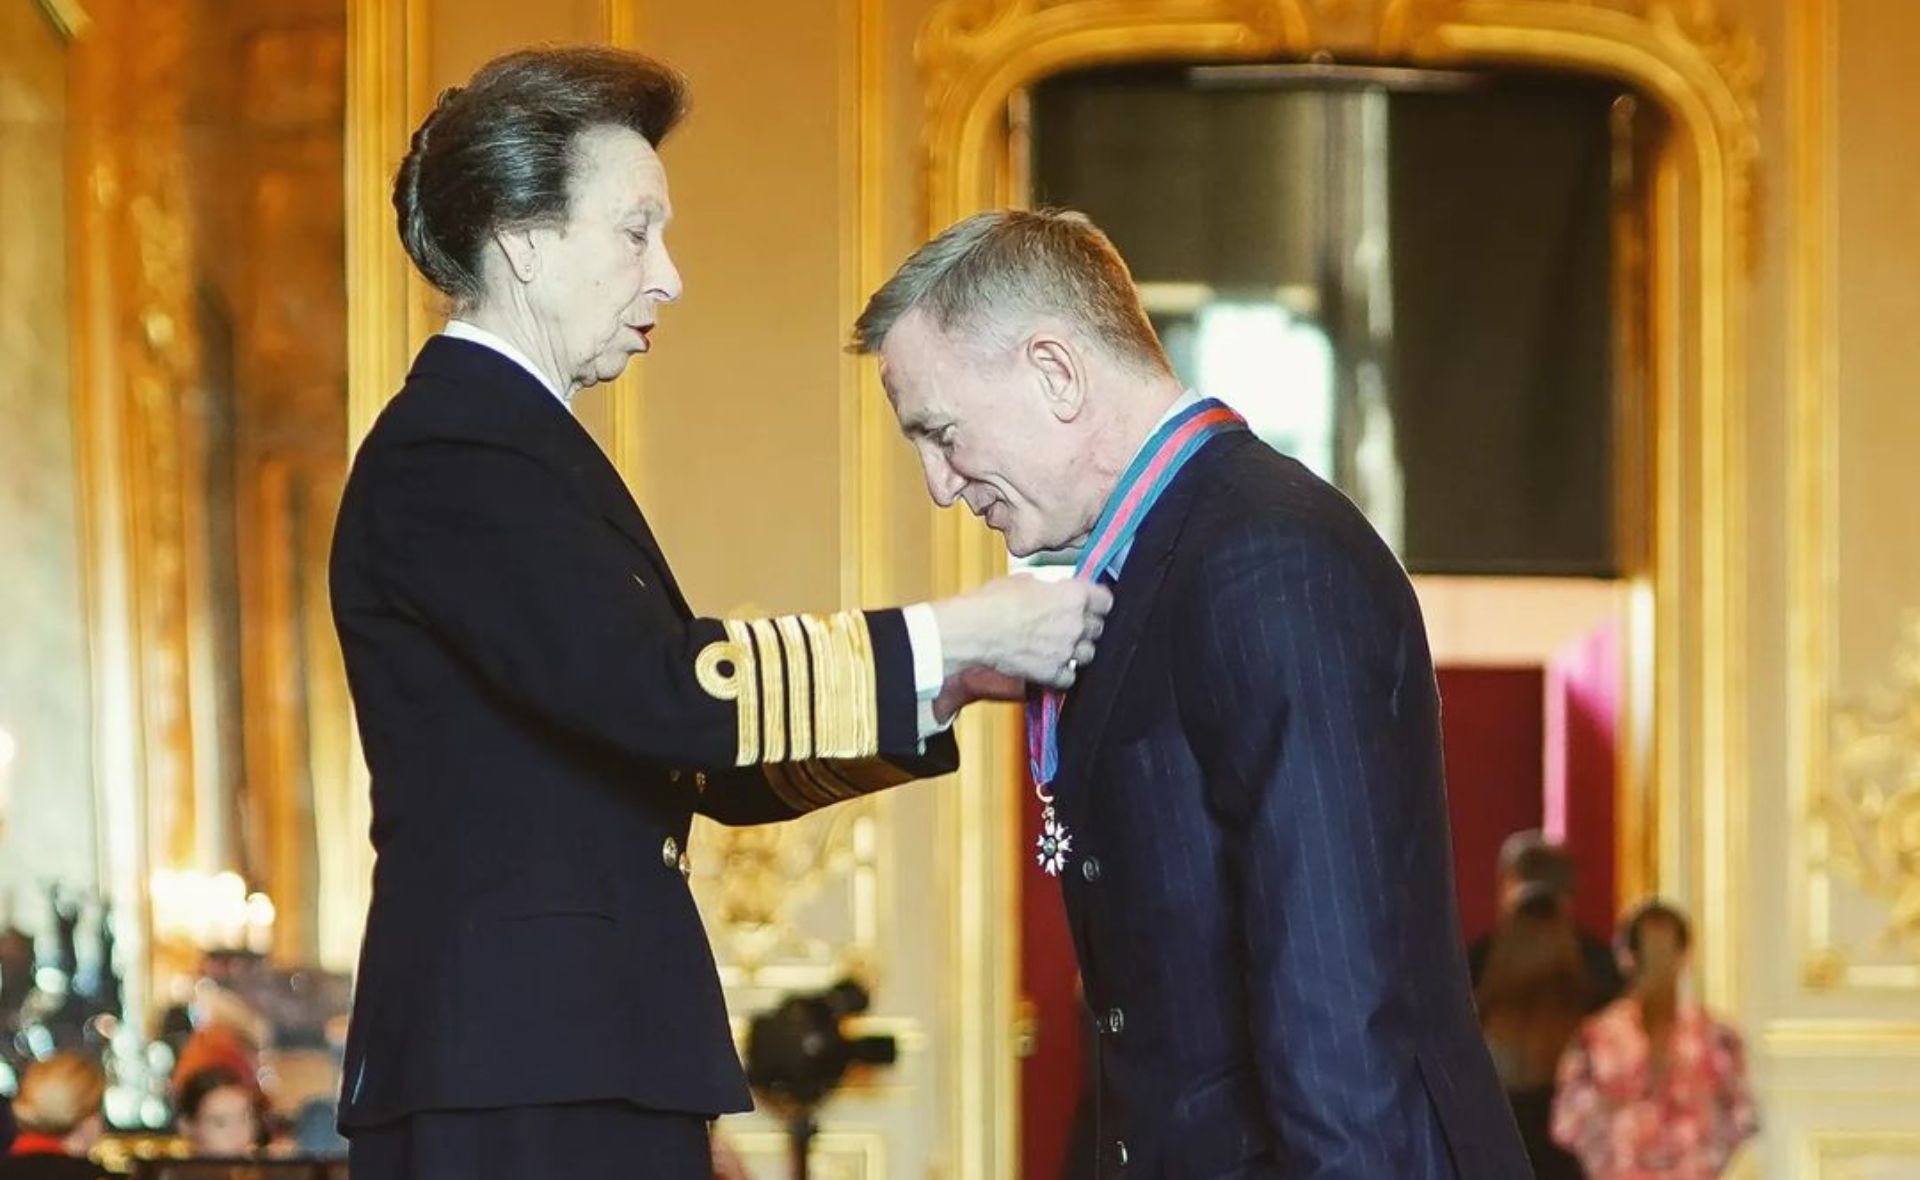 Princess Anne presents Daniel Craig with poignant accolade and there’s a special detail not to be missed